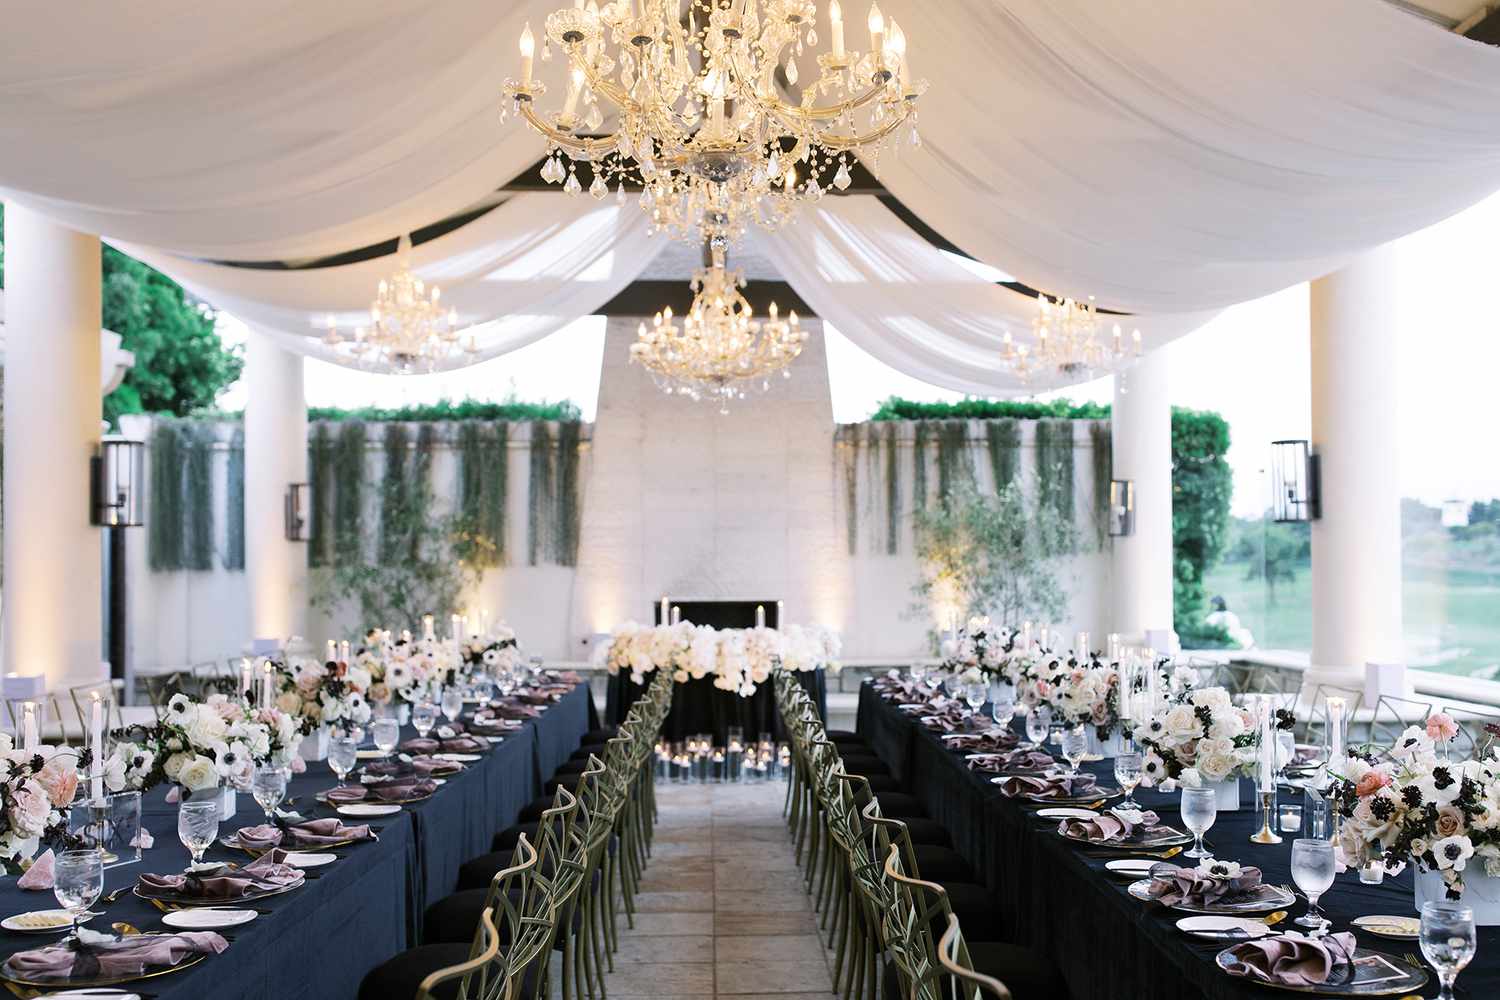 wedding reception with black velvet linens, ivory fabric, and chandeliers